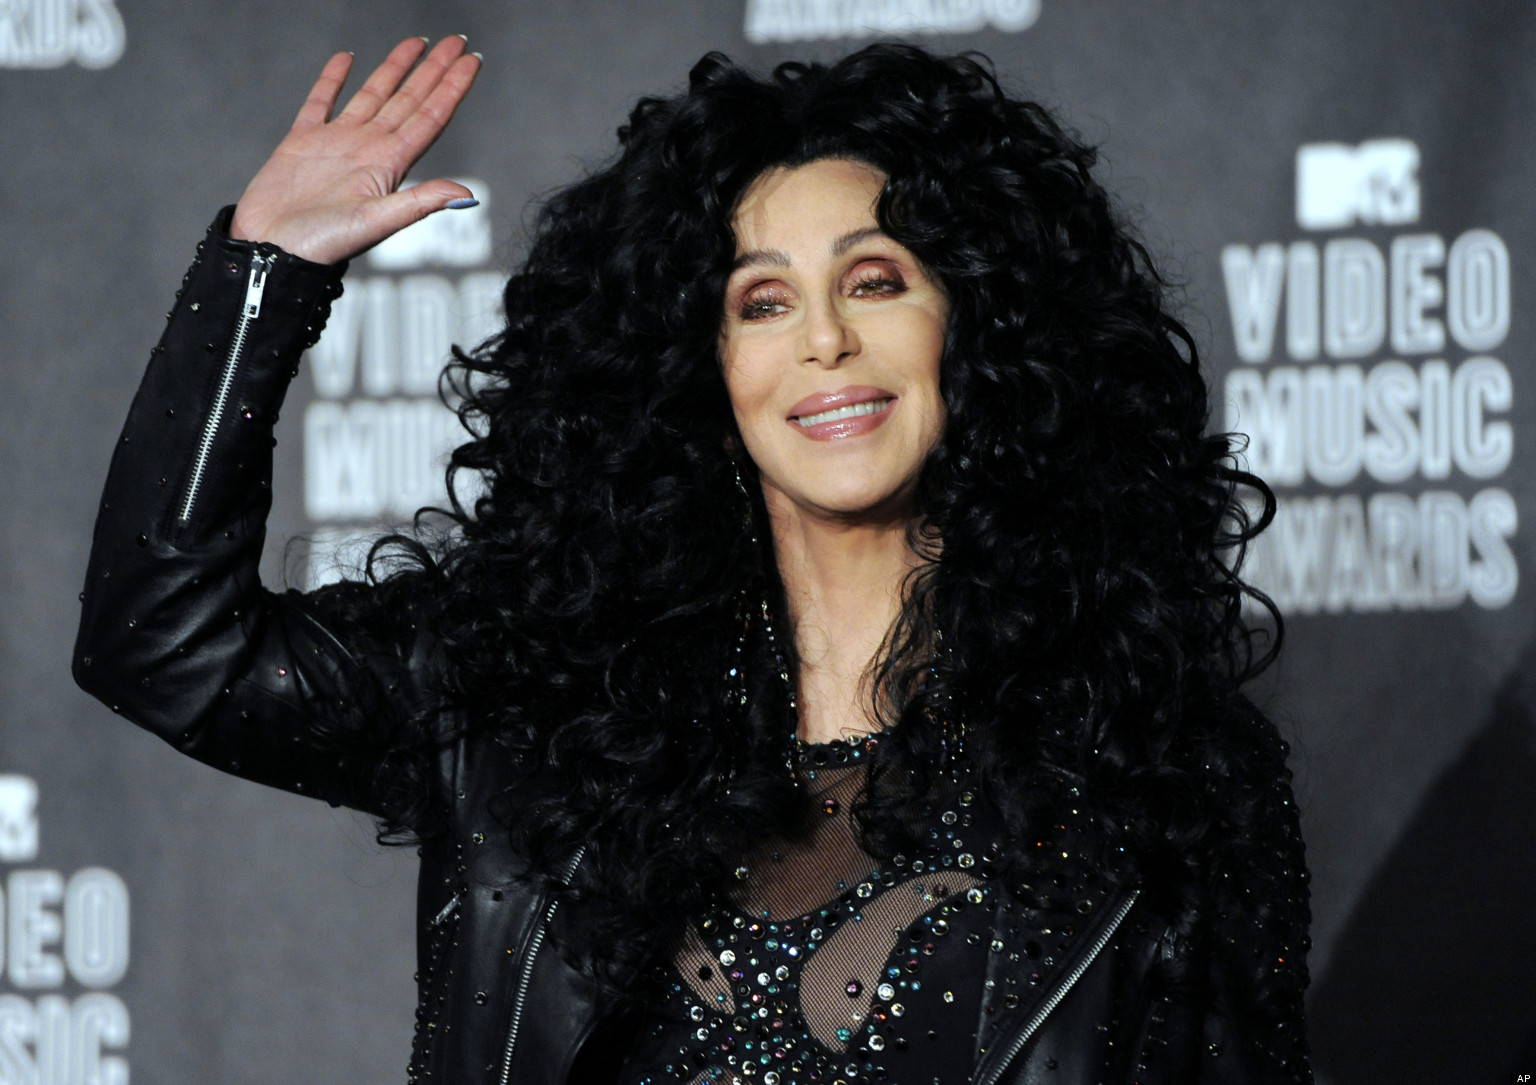 FILE - In this Sept. 12, 2010 file photo, Cher poses in the press room at the MTV Video Music Awards in Los Angeles. (AP Photo/Chris Pizzello, file)